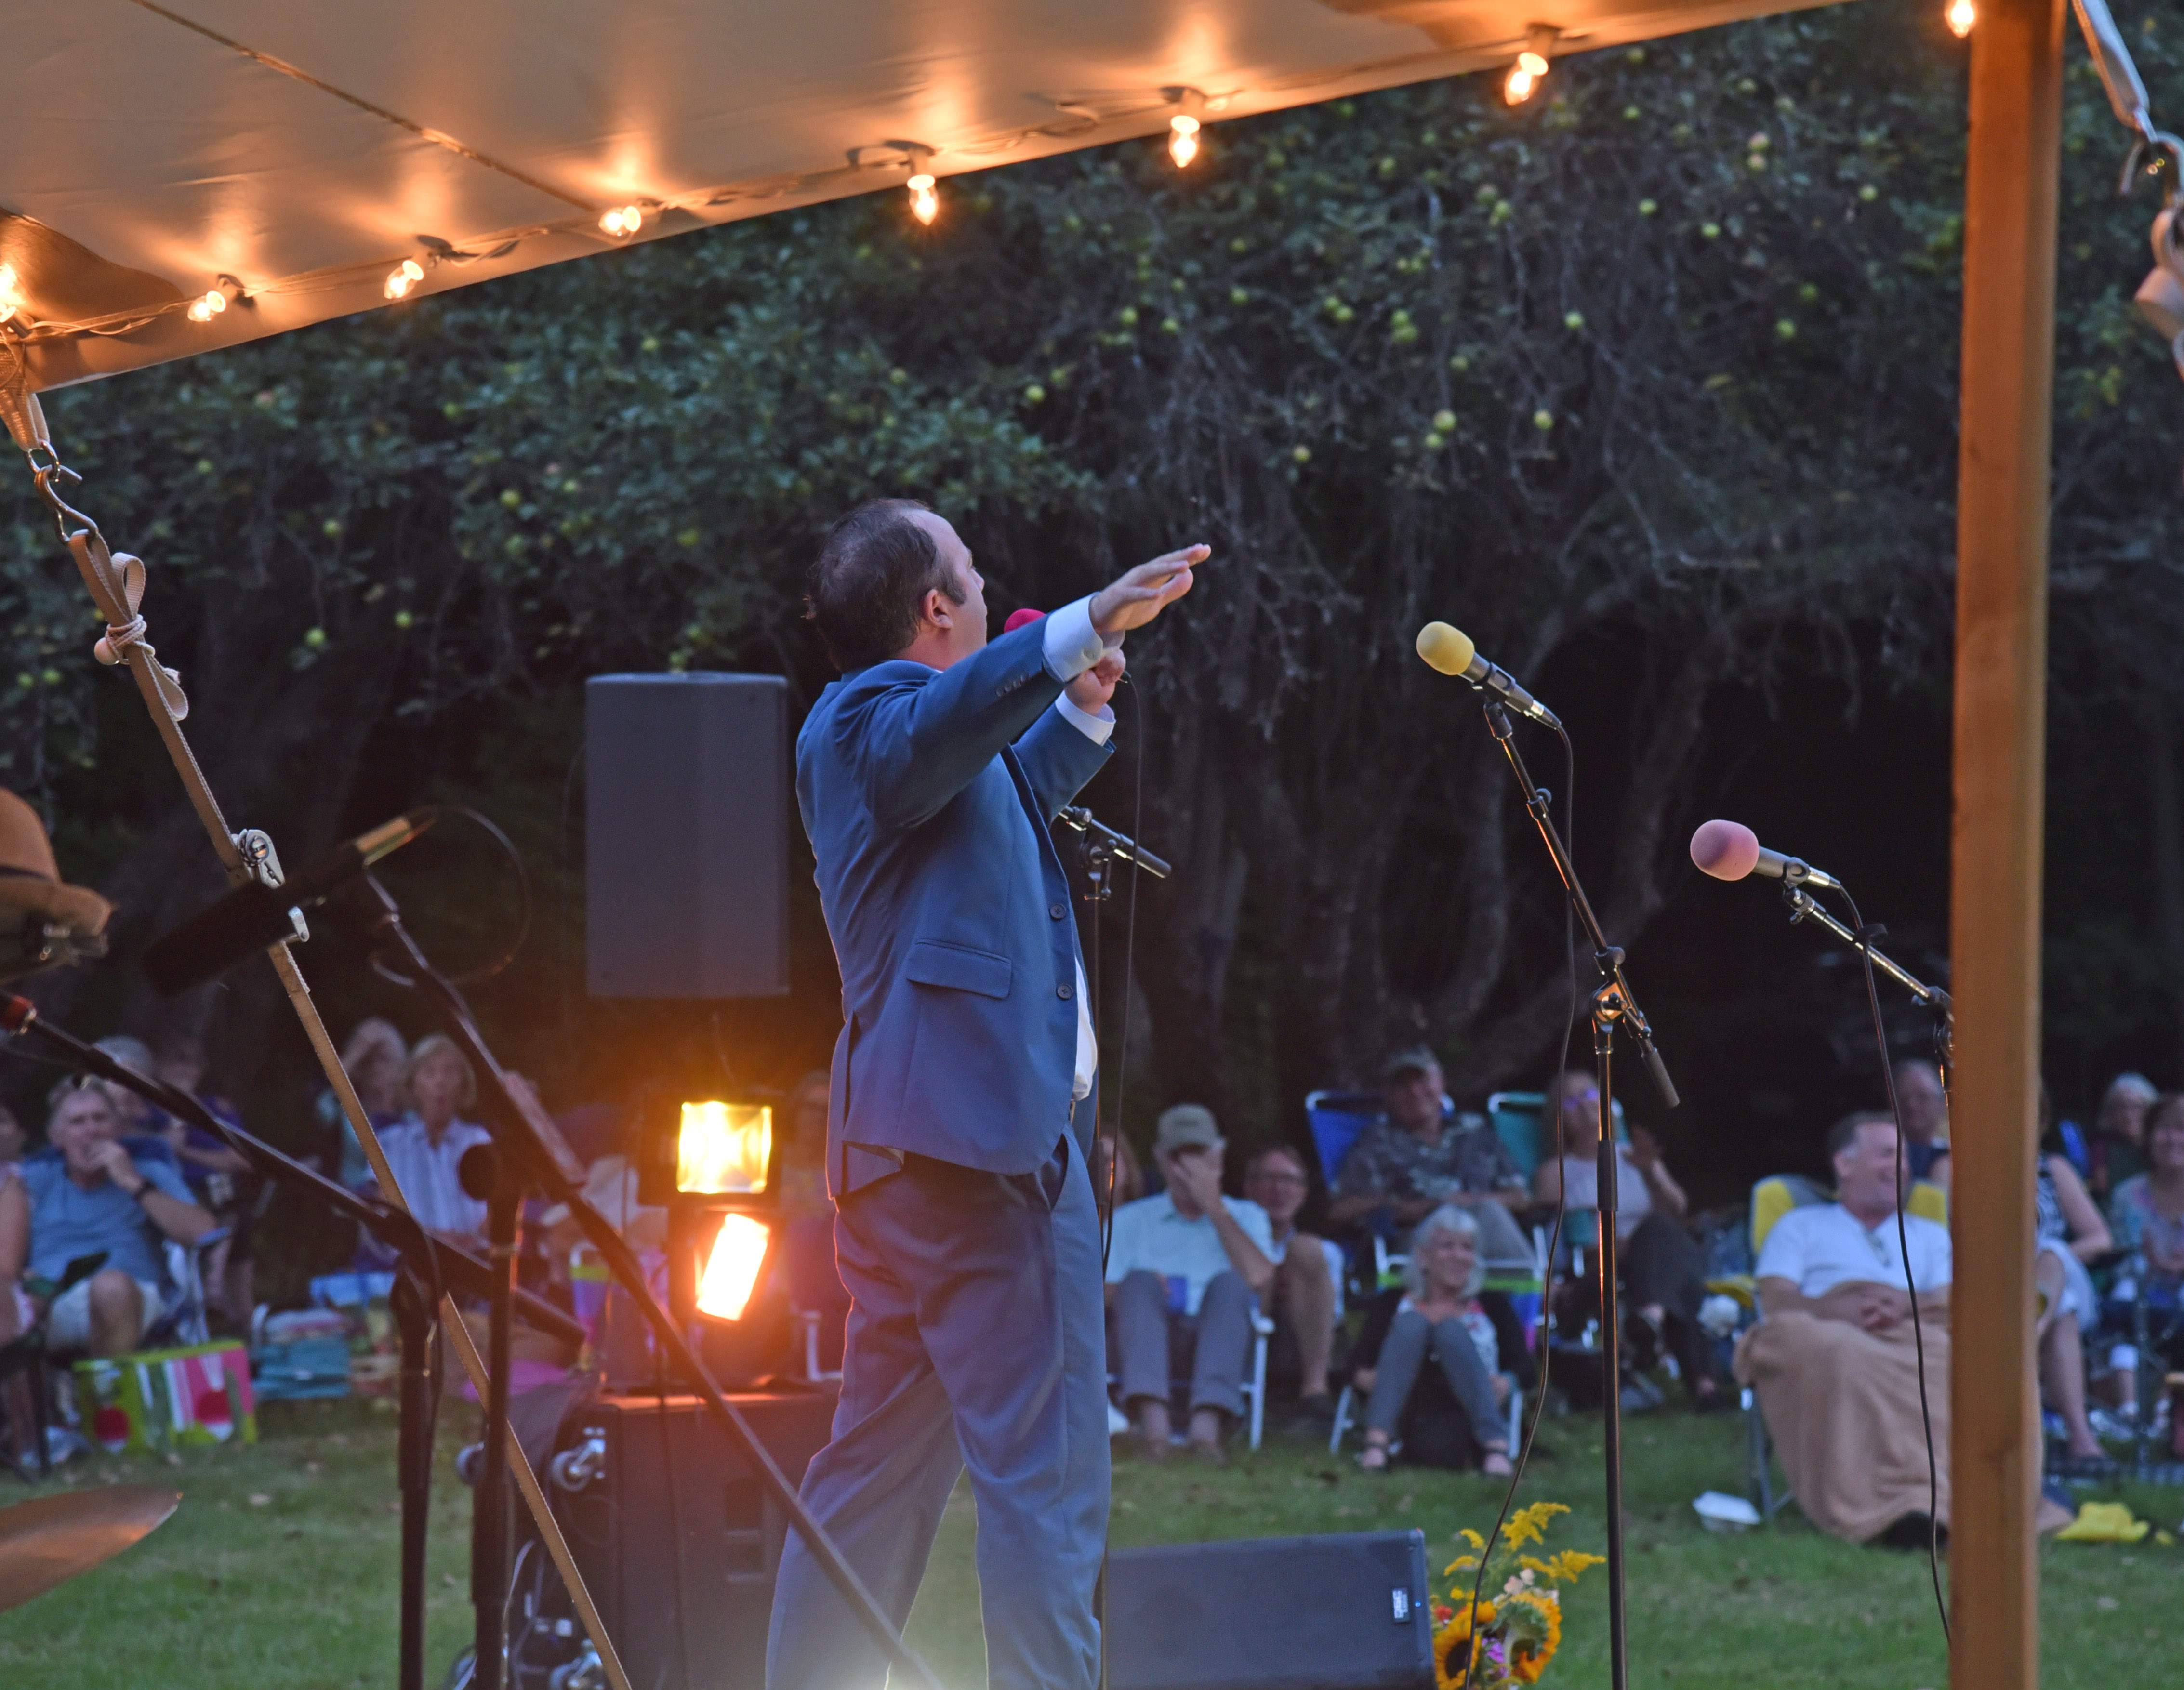 Broadway star Merritt David Janes performing outdoors under a lighted tent with the audience seated on the lawn at Moose Meadow.